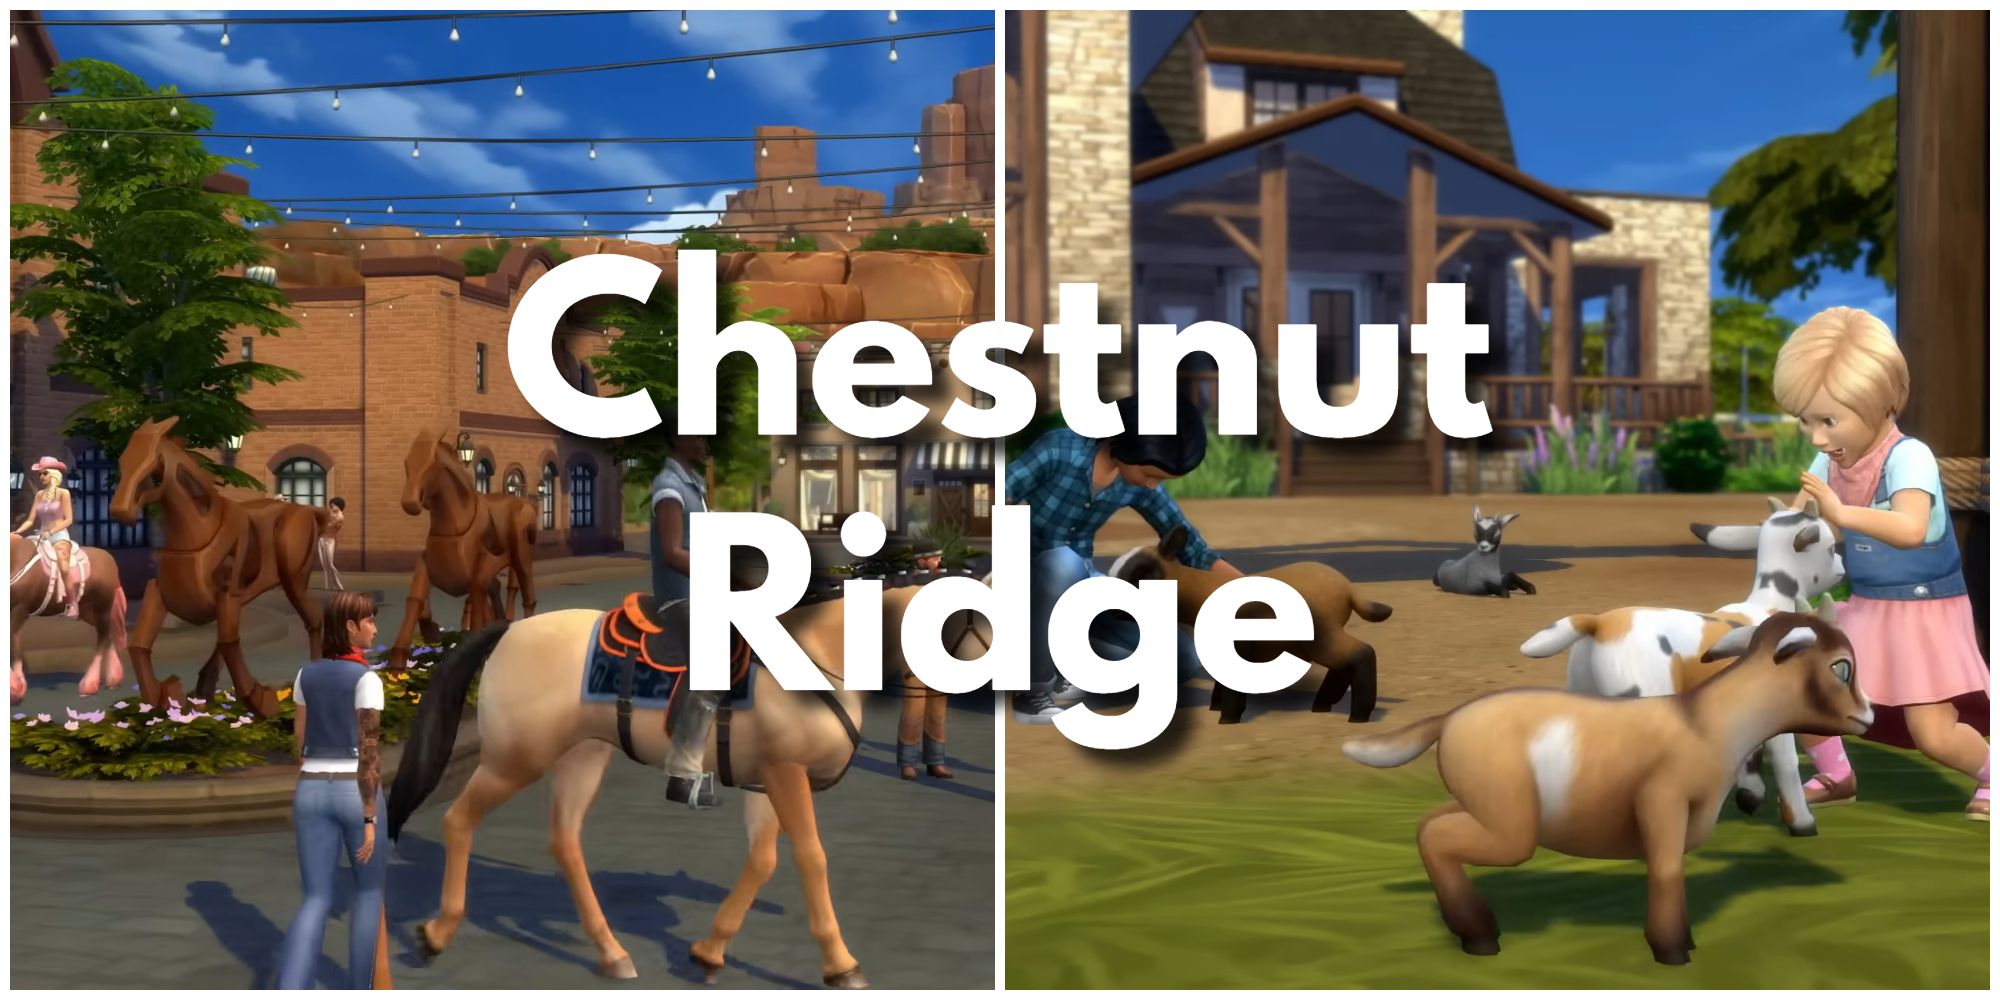 Chestnut Ridge is filled with horses, sheep, and goats, making it the perfect world for animal-lovers to reside in.